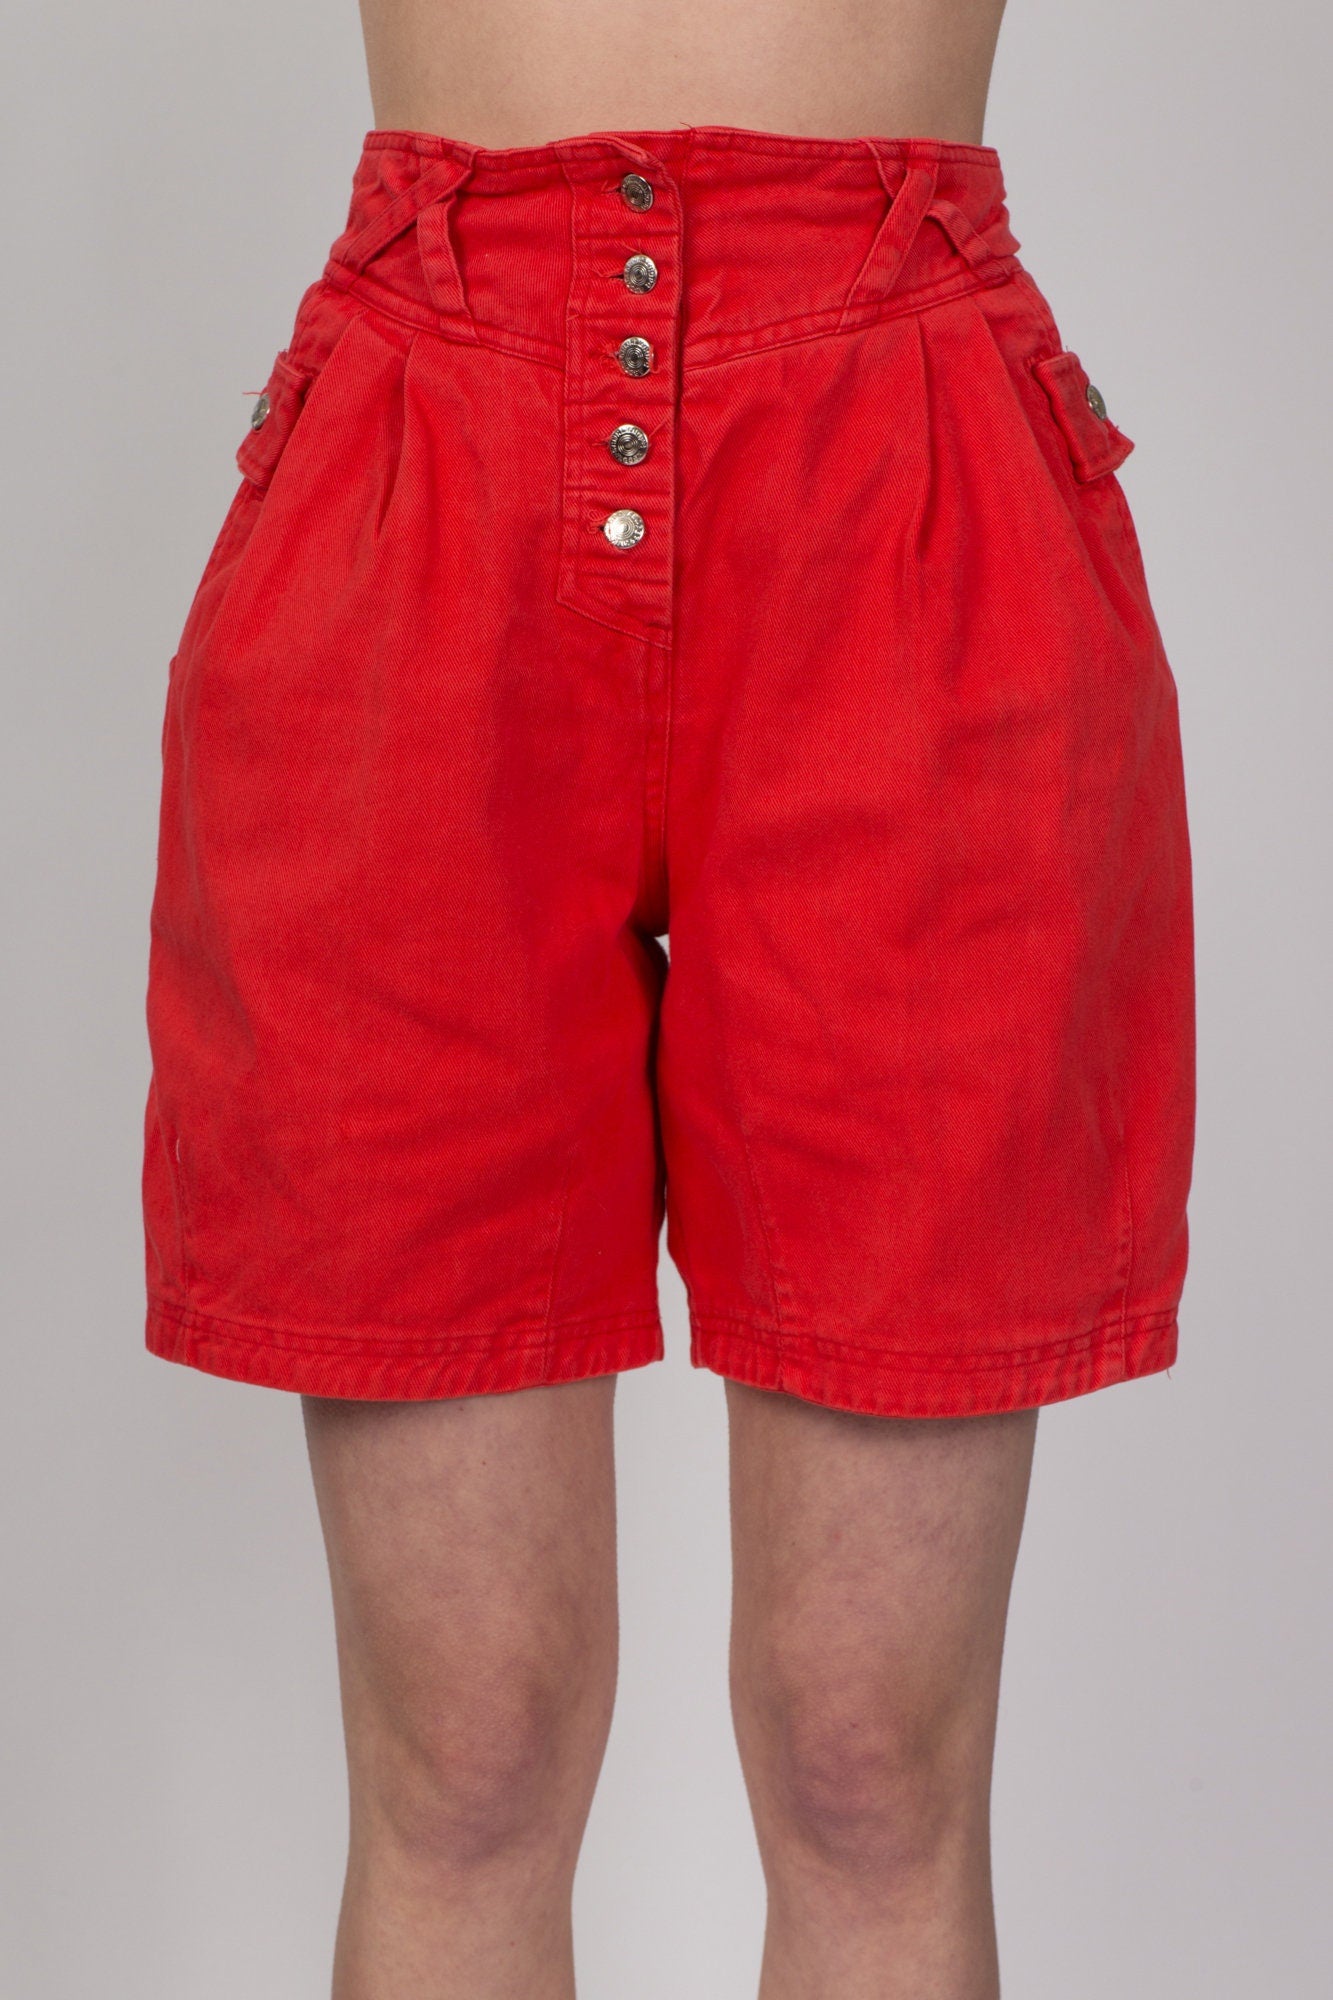 80s 90s Red Pleated Cotton Shorts - Small, 27" 